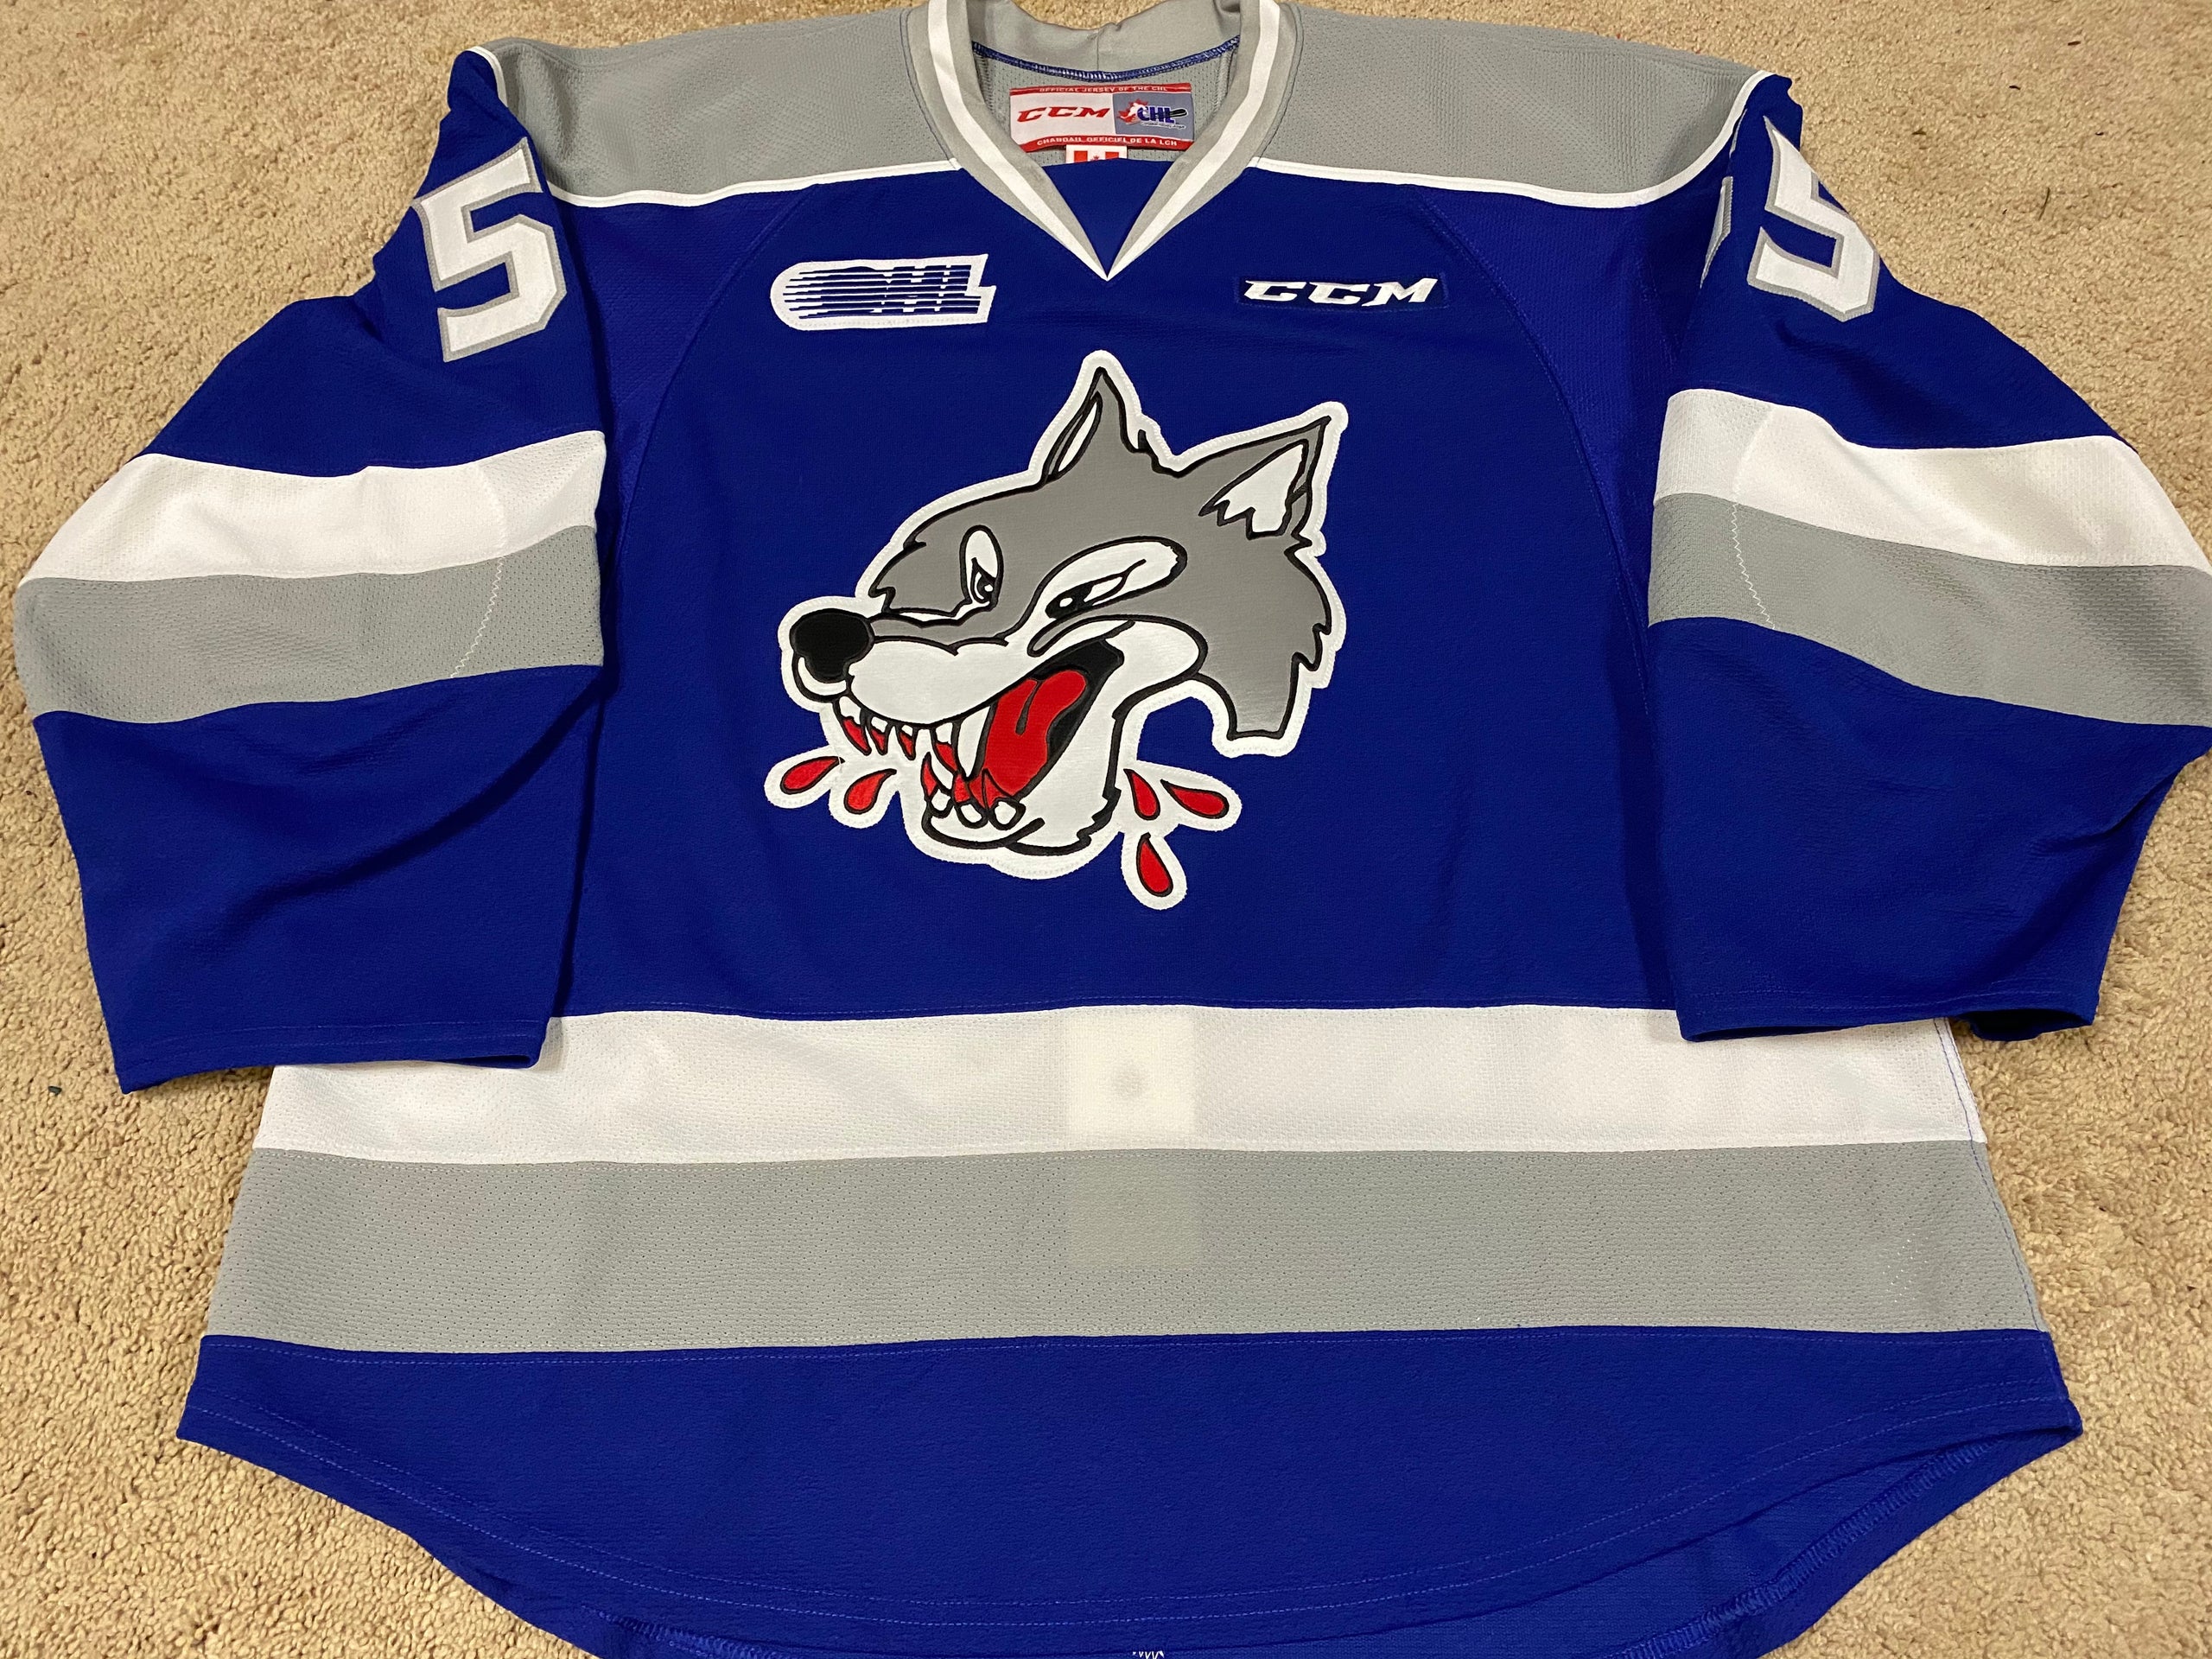 Quinton Byfield Inscribed “2018 #1 Pick” Ccm Sudbury Wolves Home